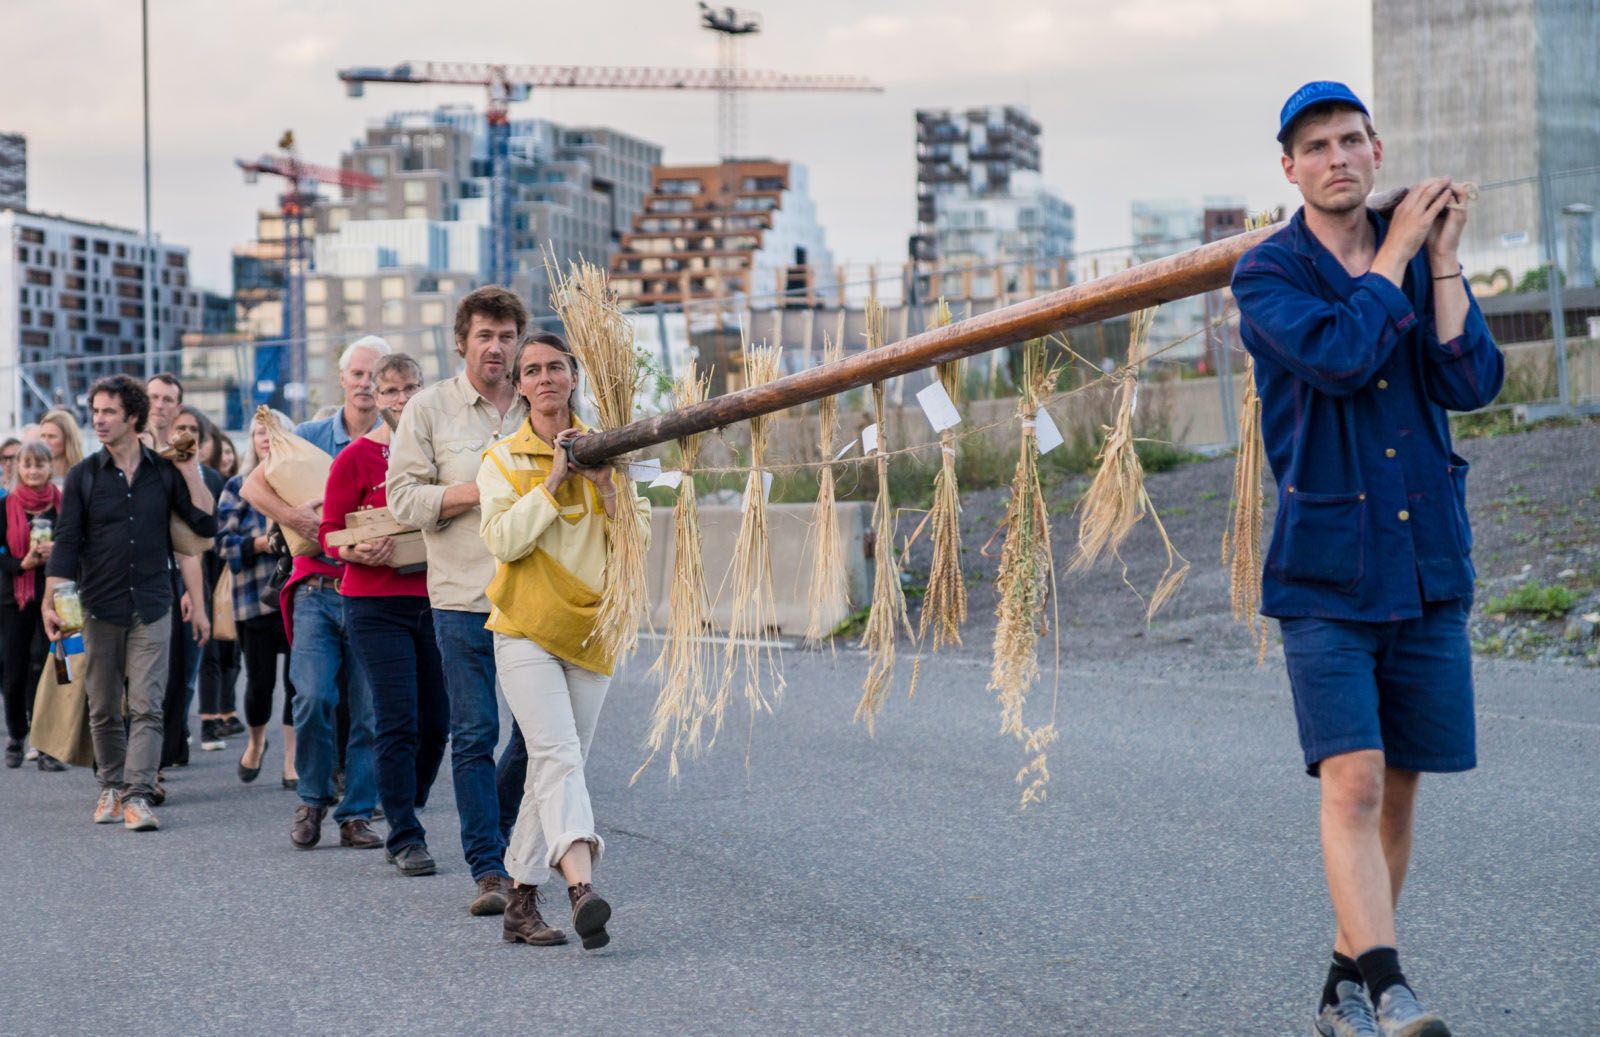 A group of people walking single-file. The first two are carying a large wooden pole tied with dried plants on their shoulders.